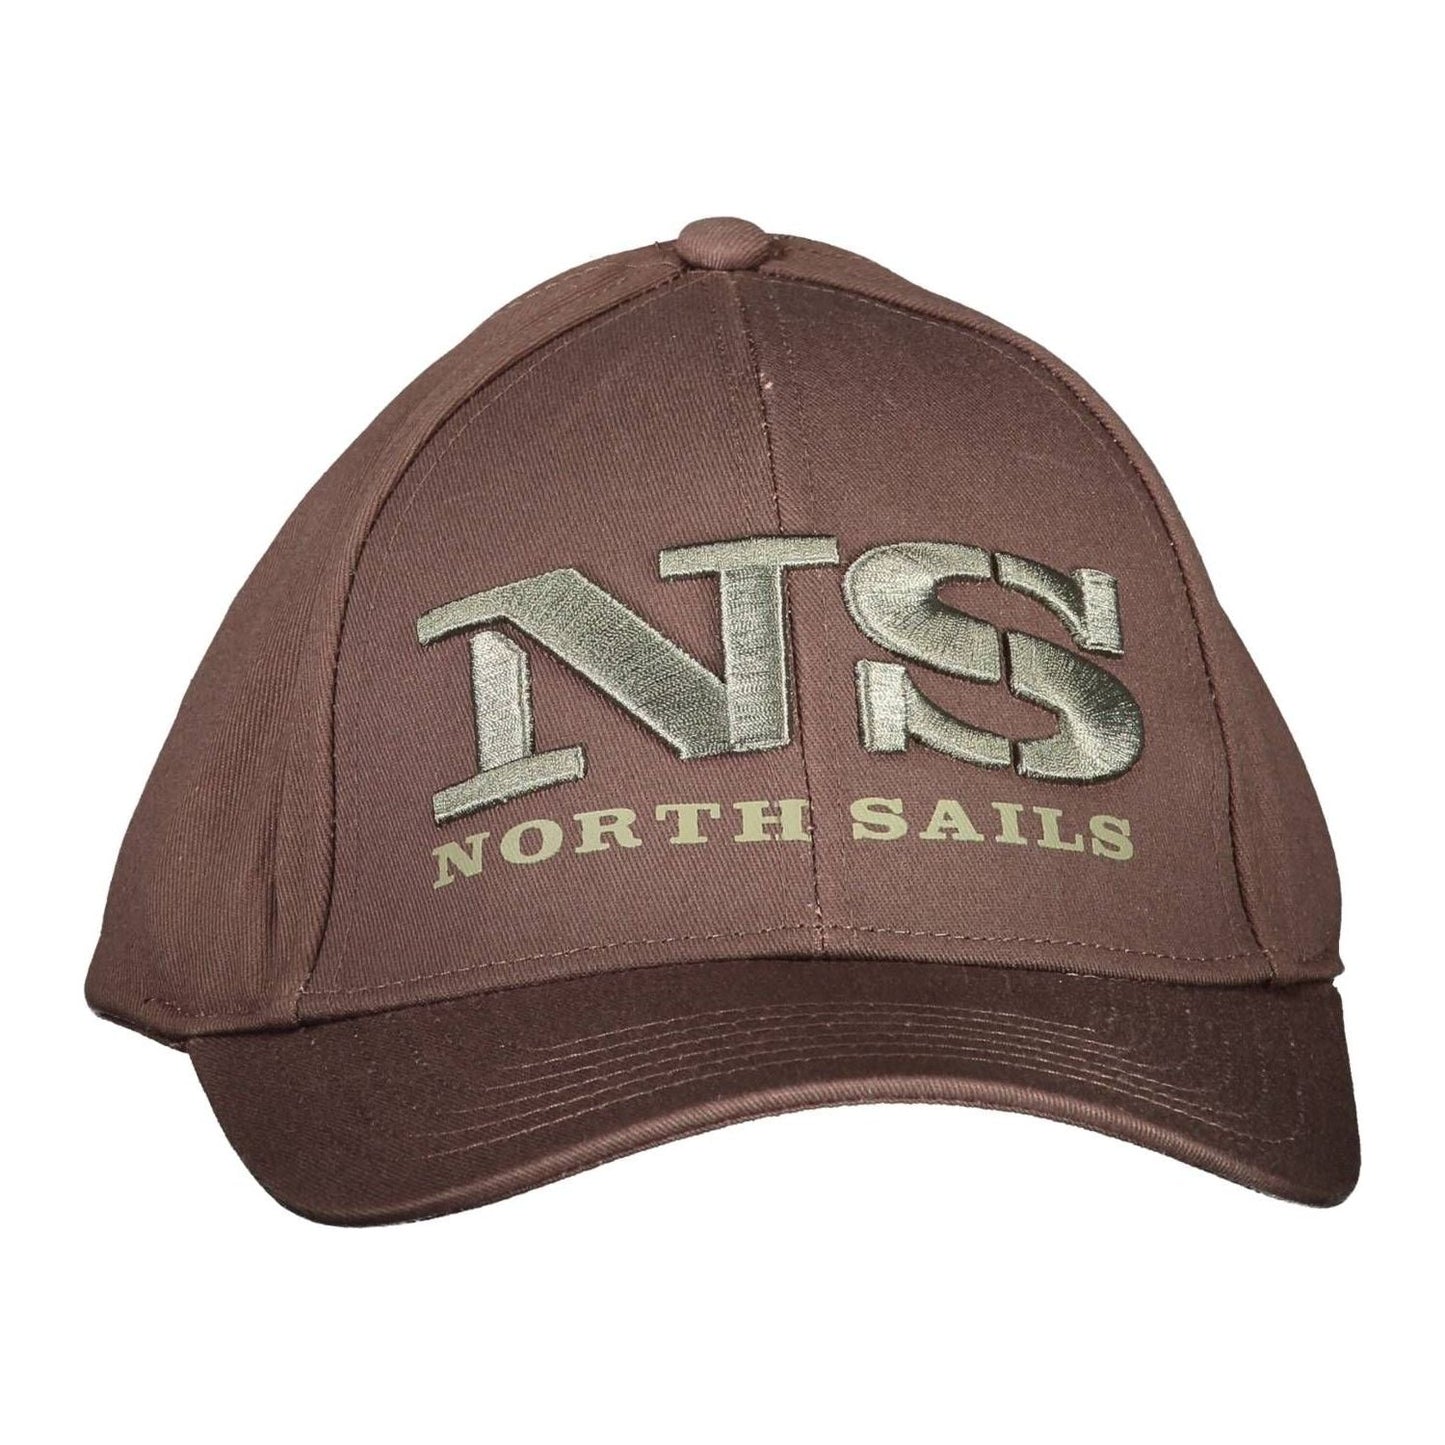 North Sails Chic Embroidered Cotton Cap with Visor chic-embroidered-cotton-cap-with-visor